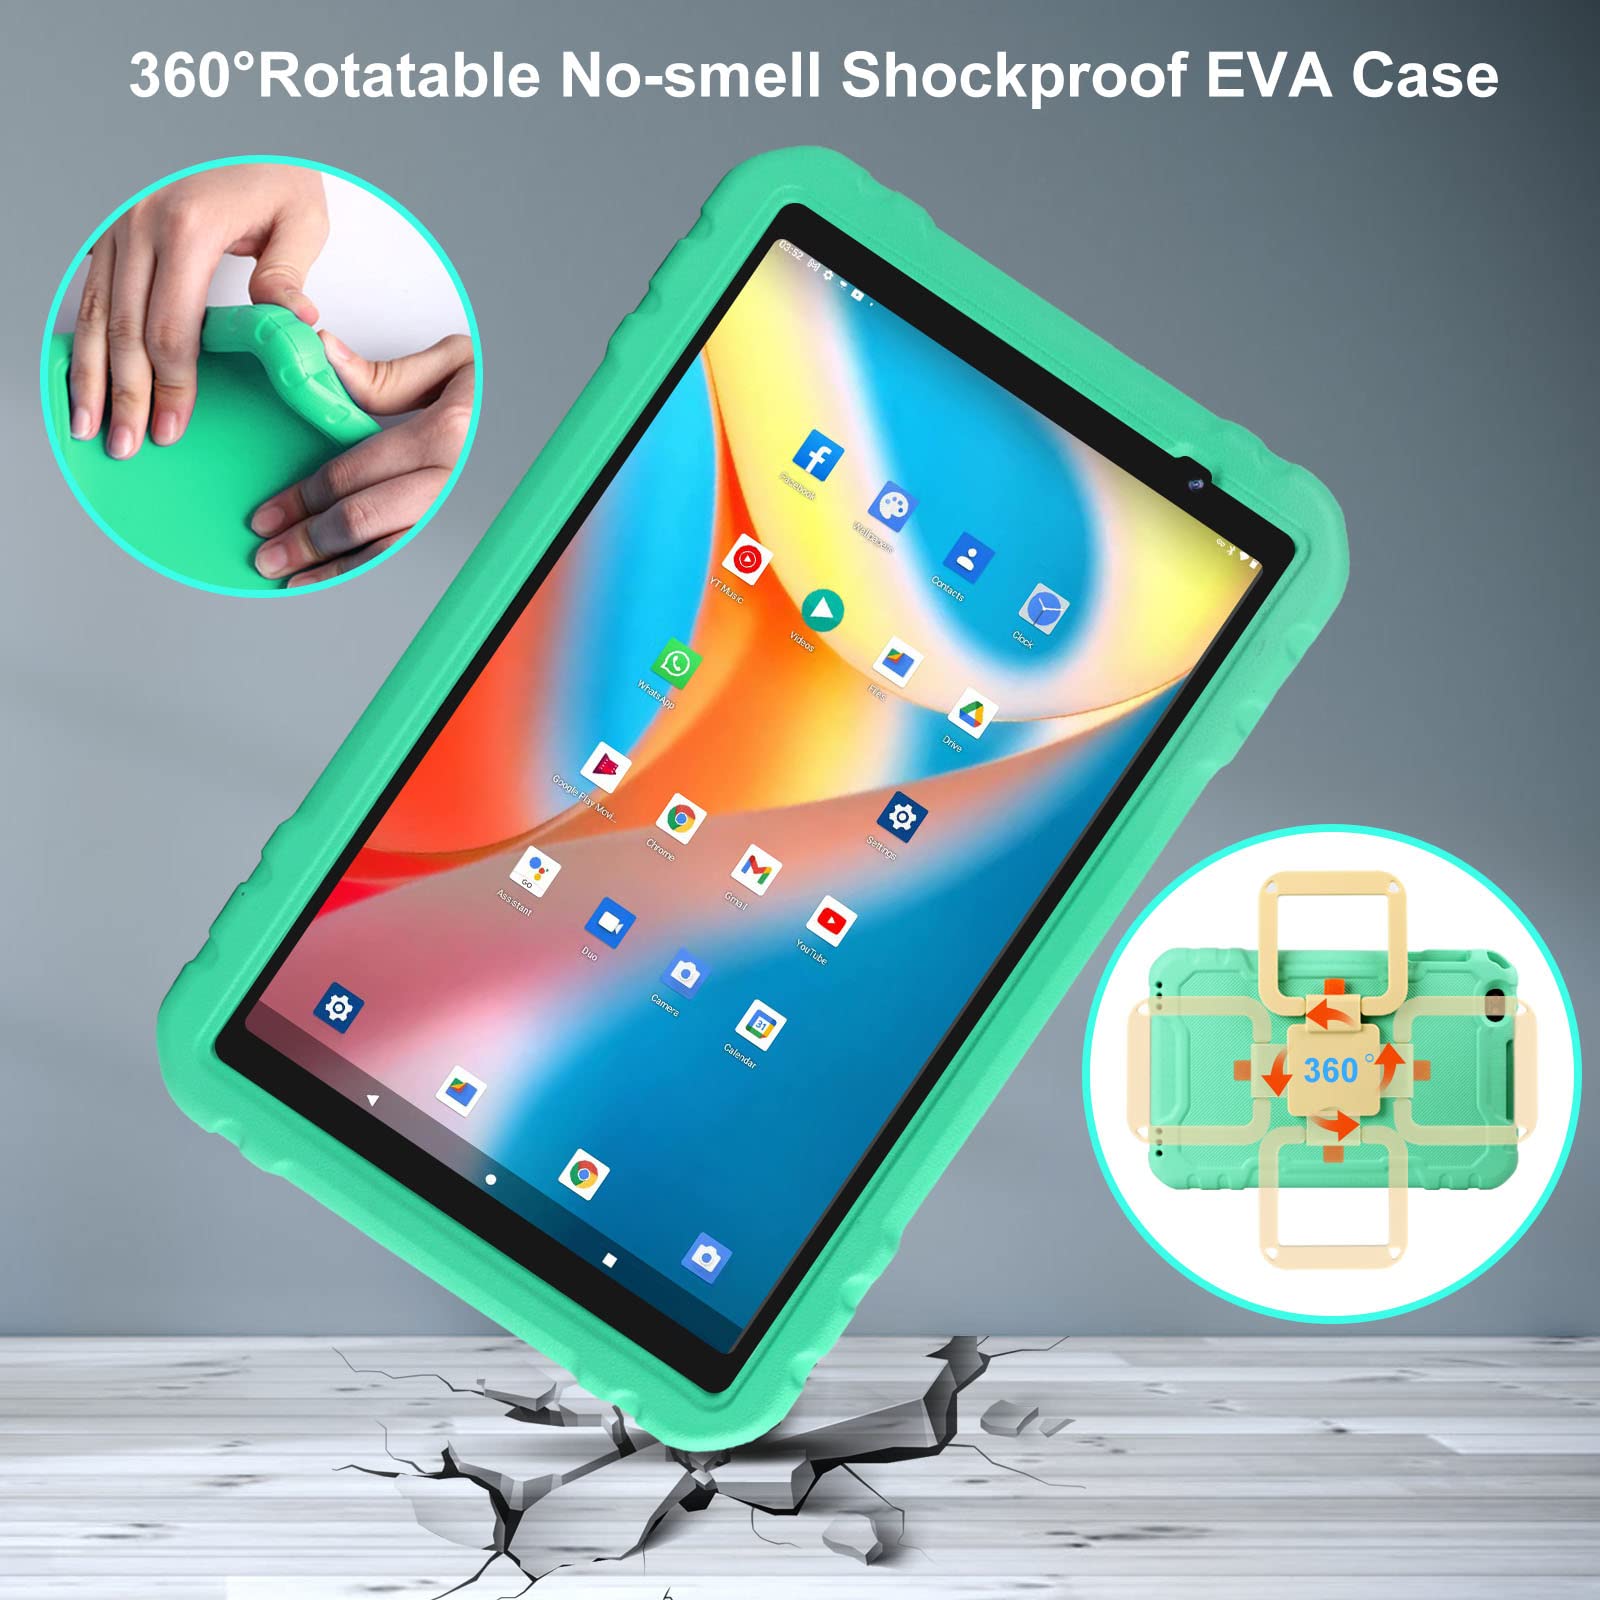 AOCWEI 2024 Tablet, 10 inch Android 13 Tablets with Octa-Core, 14GB RAM 128GB ROM, 8000mAh Battery, Drop-Proof Case, TF 512GB, HD IPS Touchscreen, 5G WiFi, Bluetooth, GPS, Split Screen -X500 Green